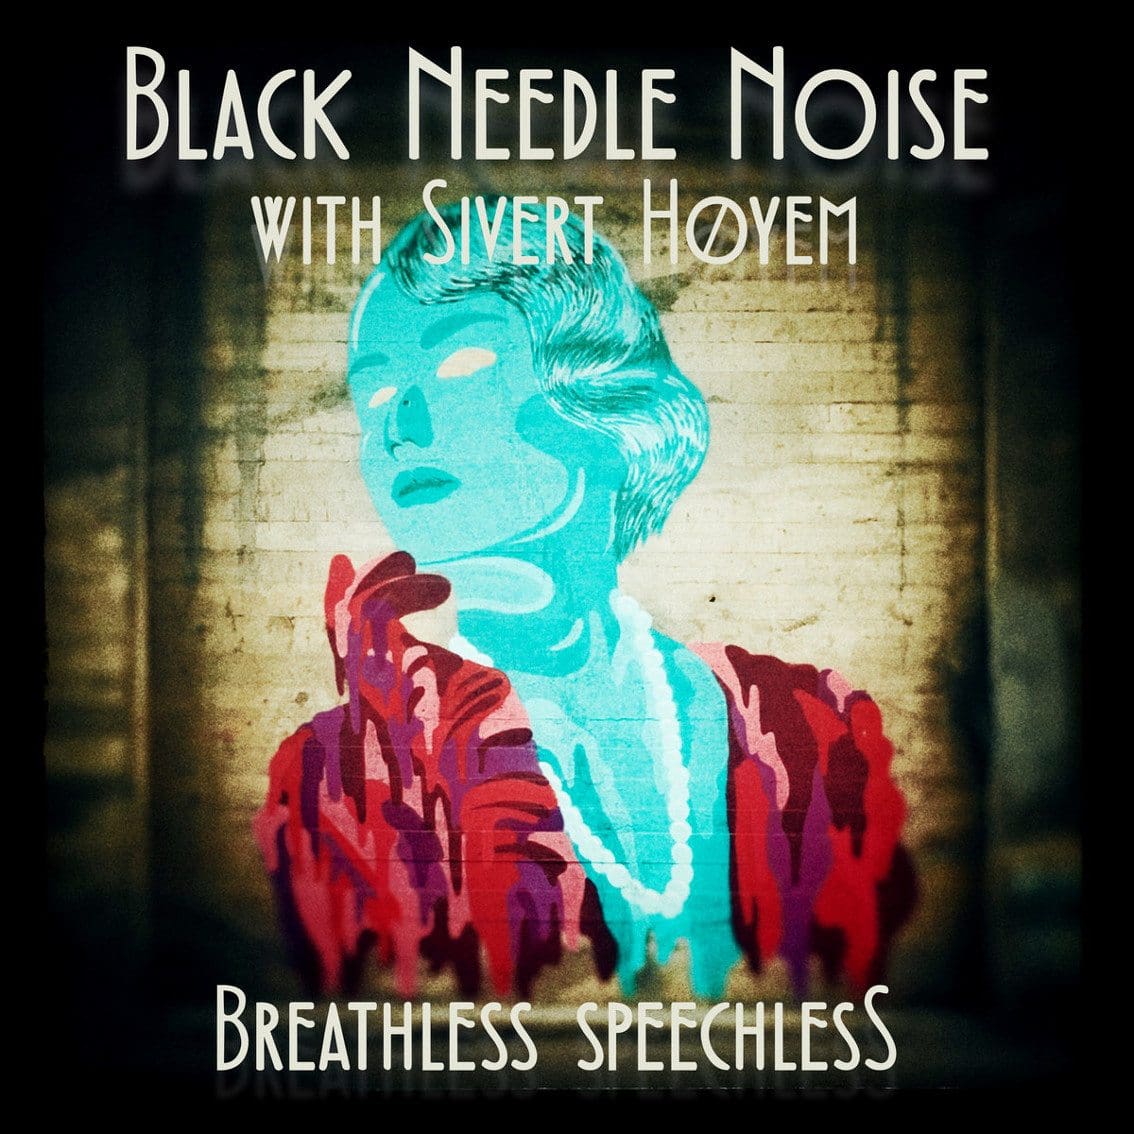 Black Needle Noise joins up with Sivert Høyem for brand new track 'Breathless Speechless' - available now as a name-your-price single track